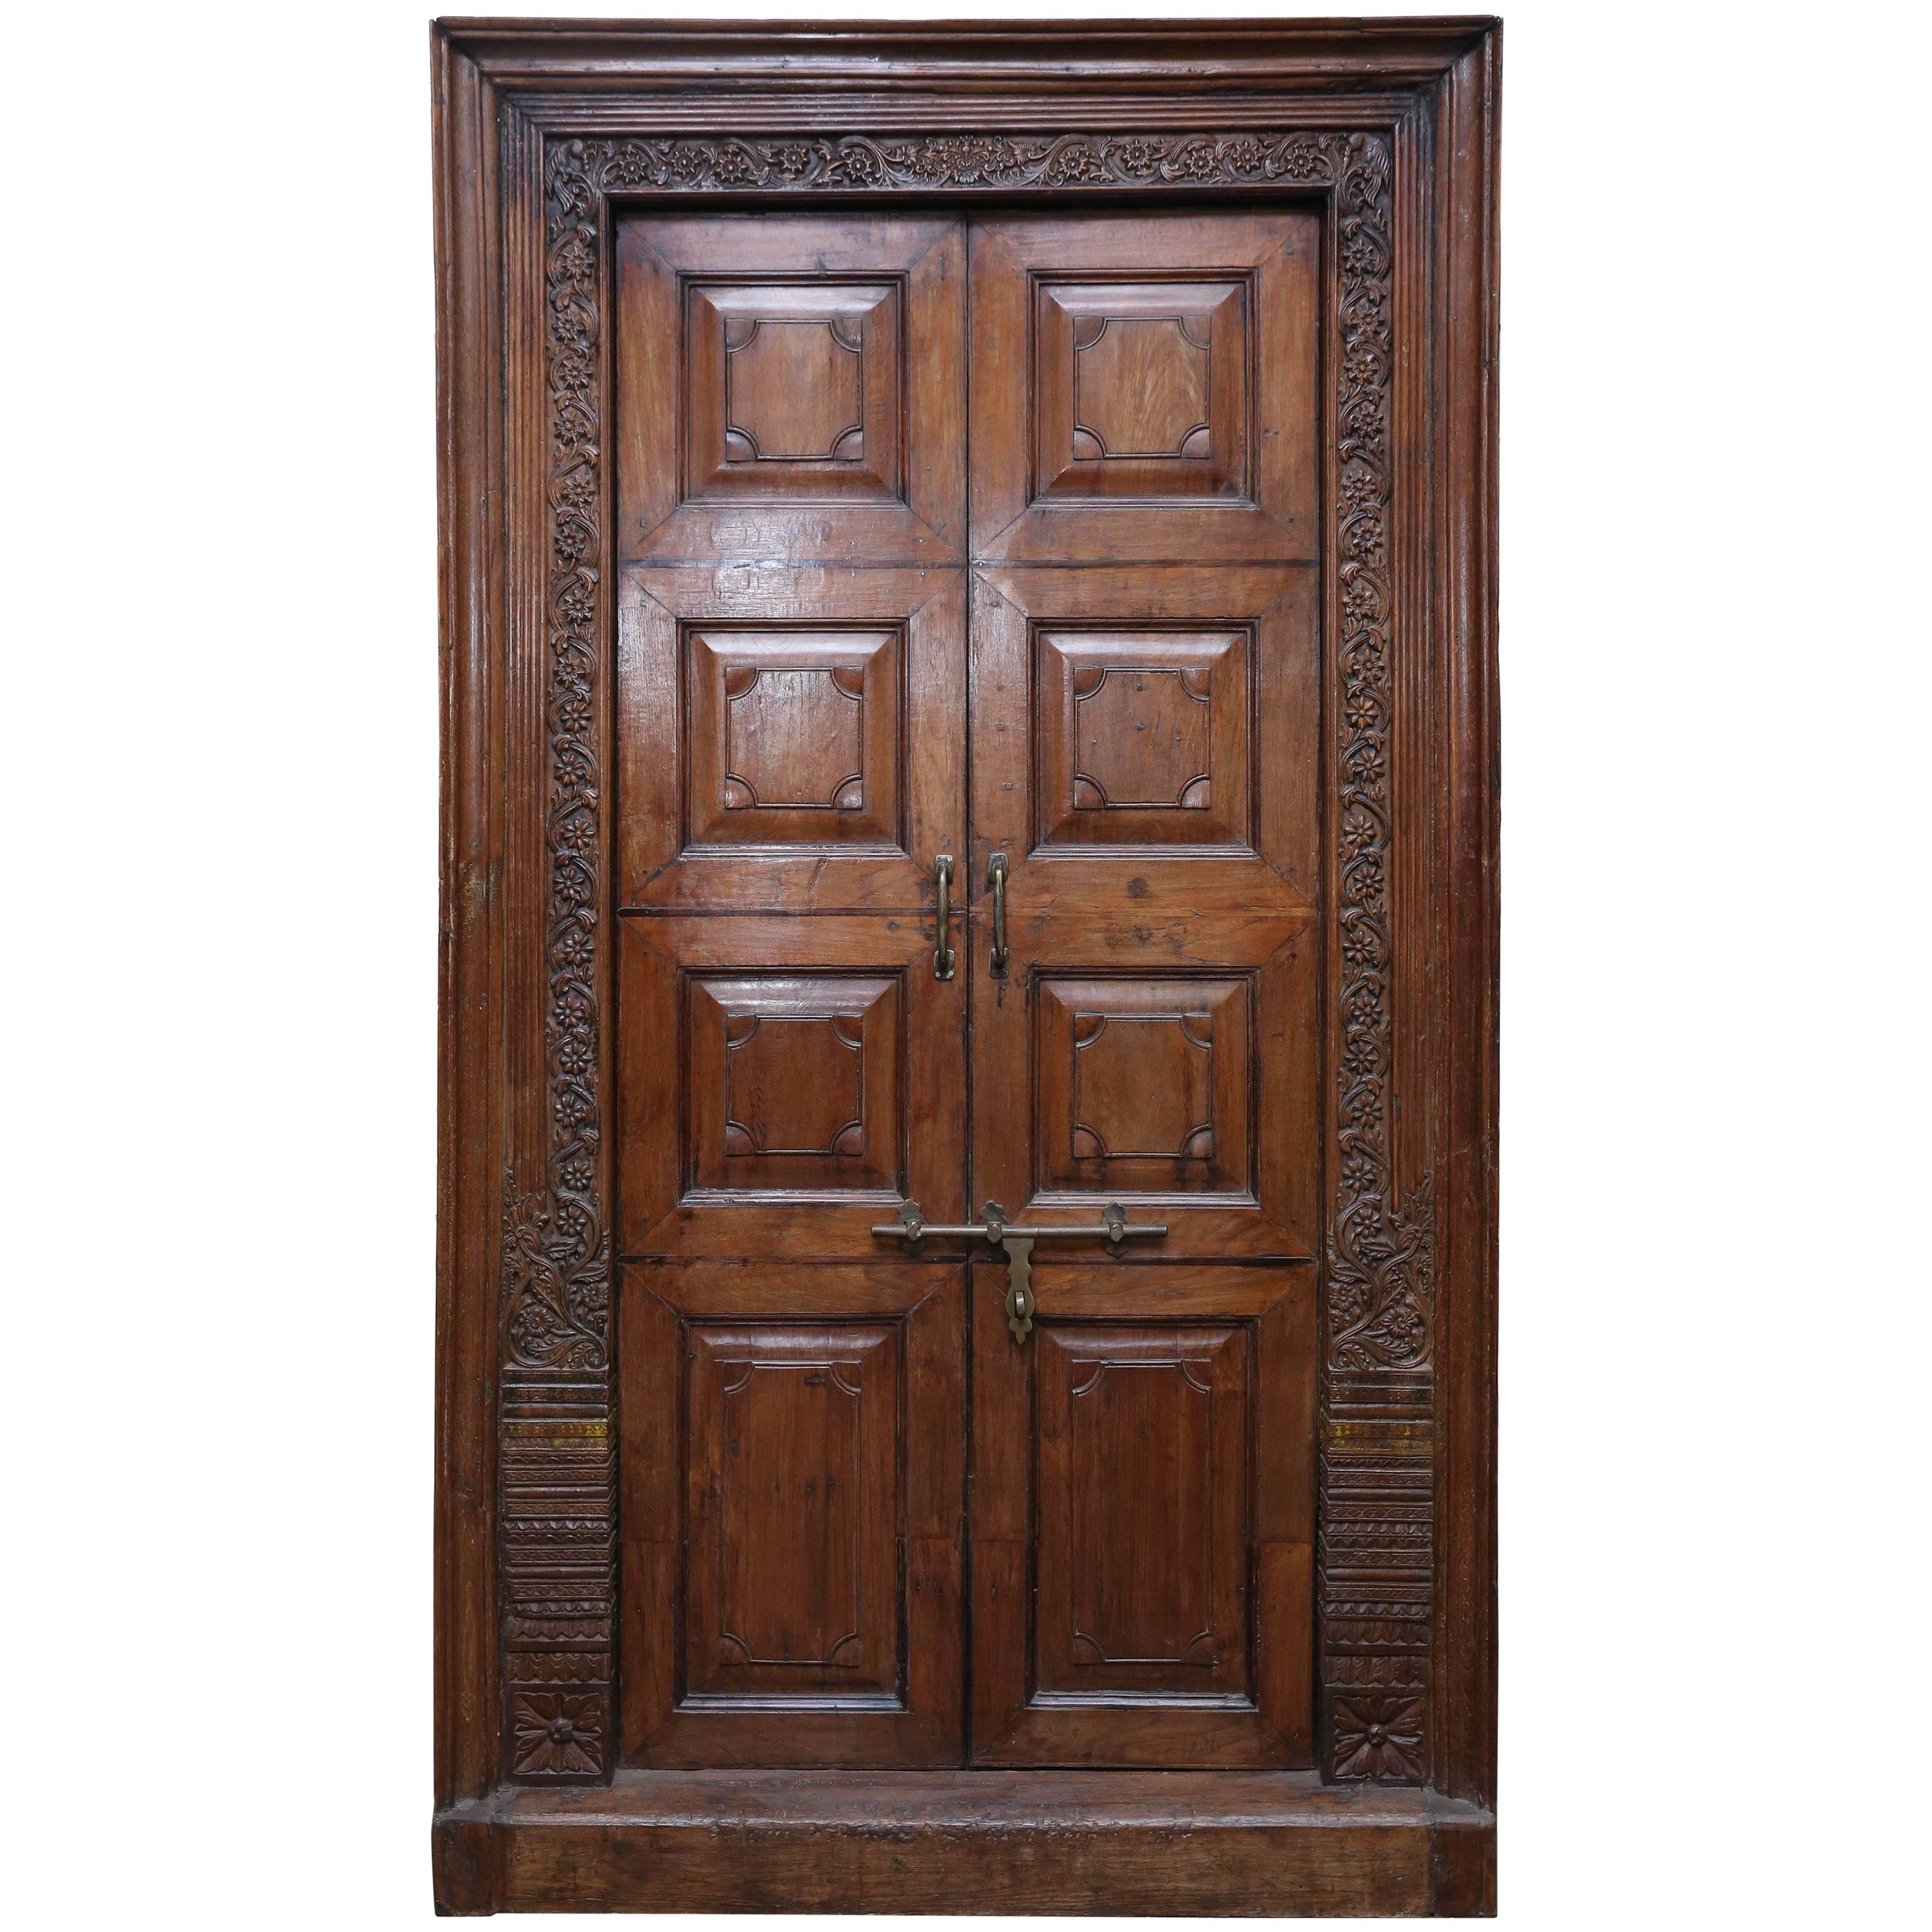 Third Quarter of the 19th Century Solid Teak Wood Superbly Crafted Entry Door For Sale